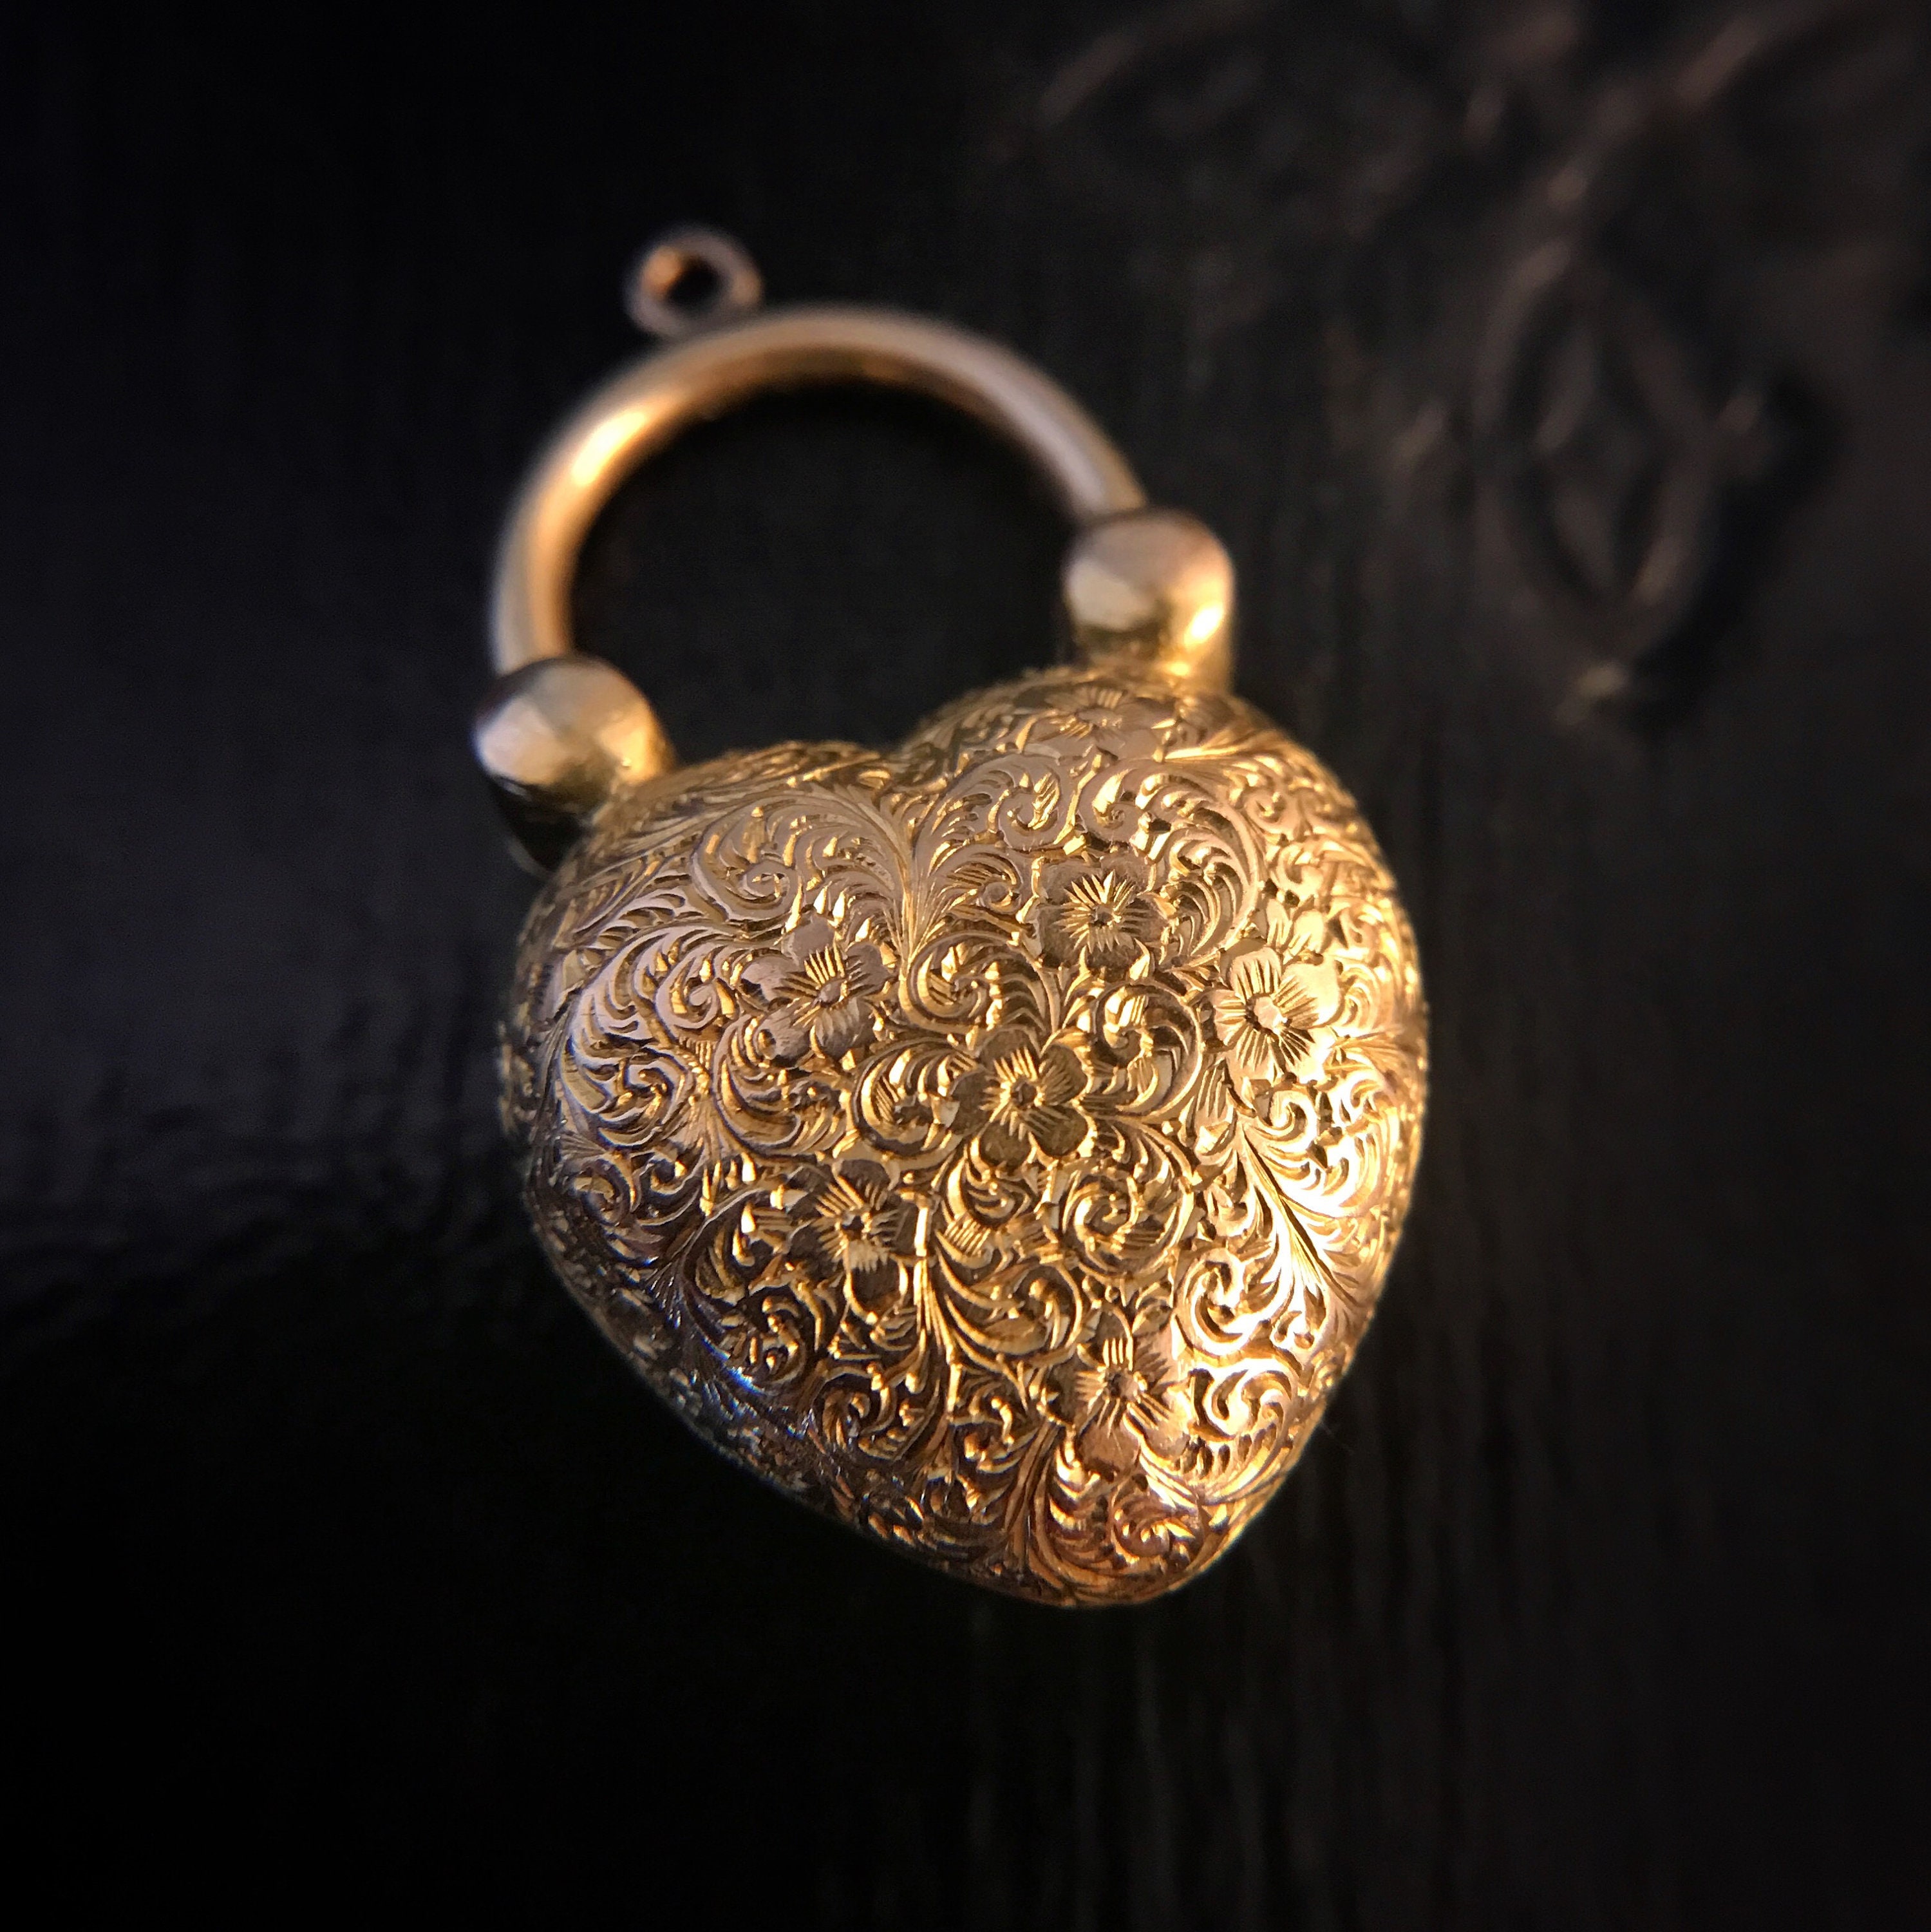 LAELIUS Antiques – Victorian Necklace with Heart Padlock and Key